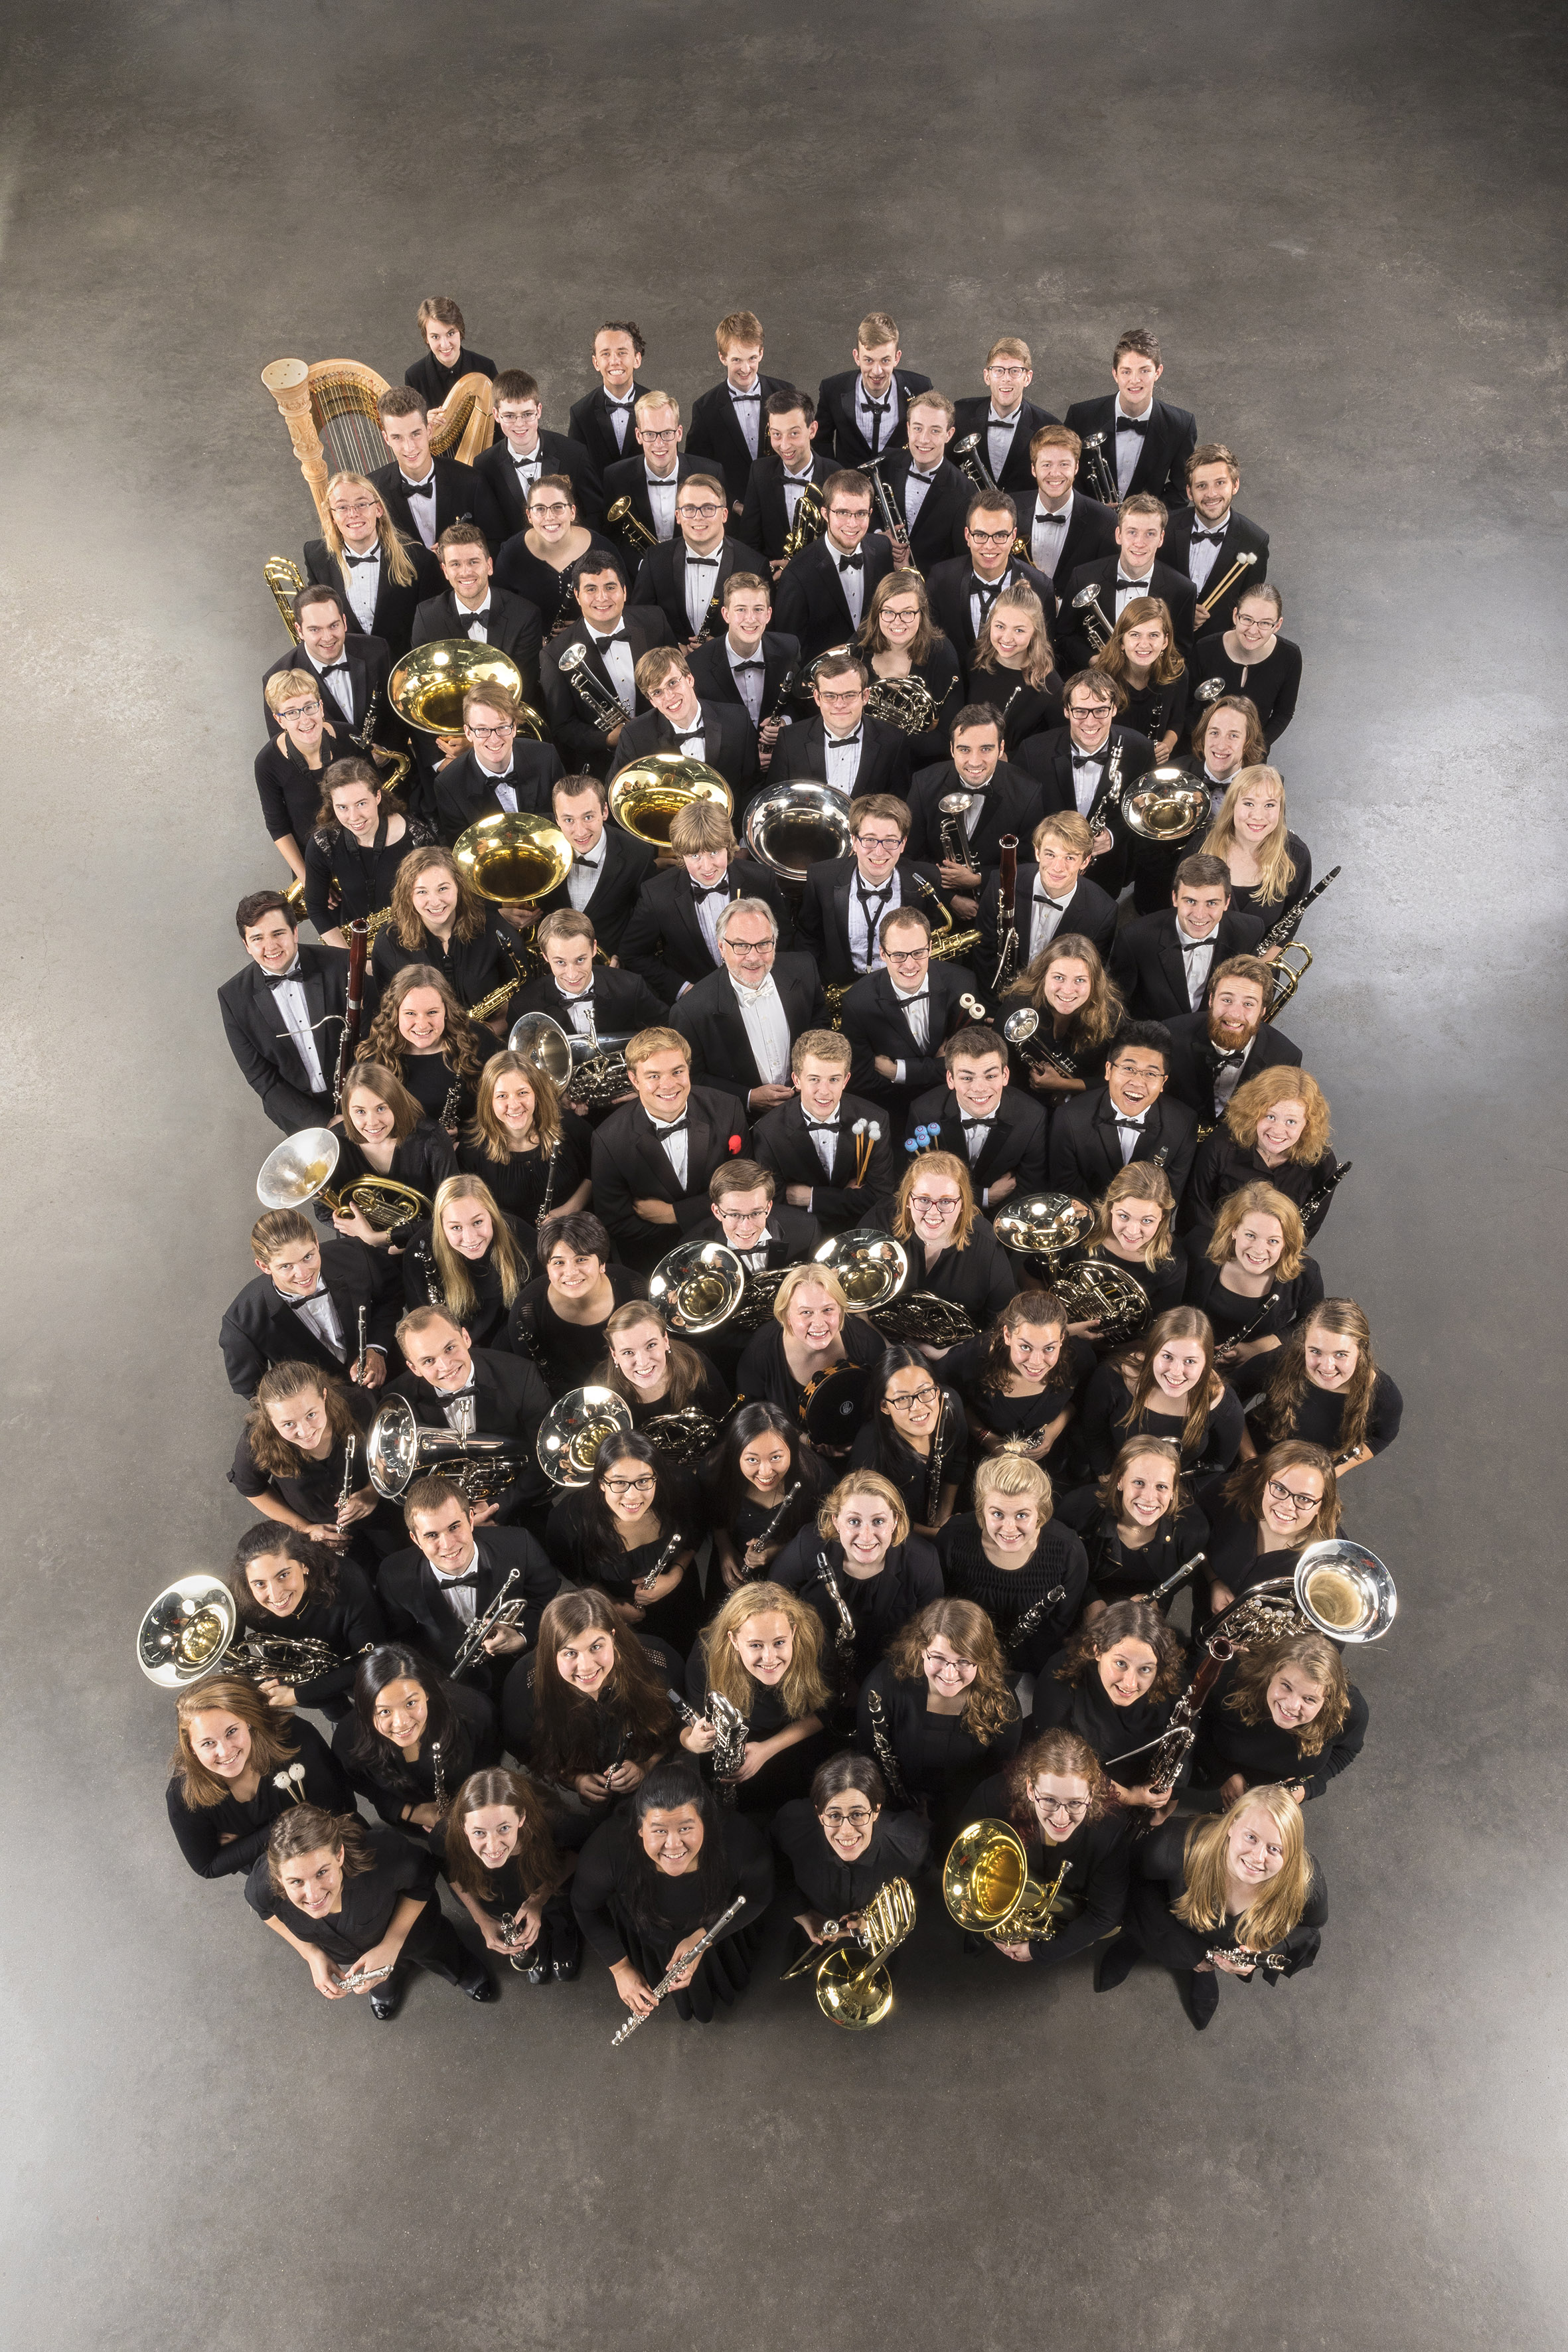 American Concert Band On Tour